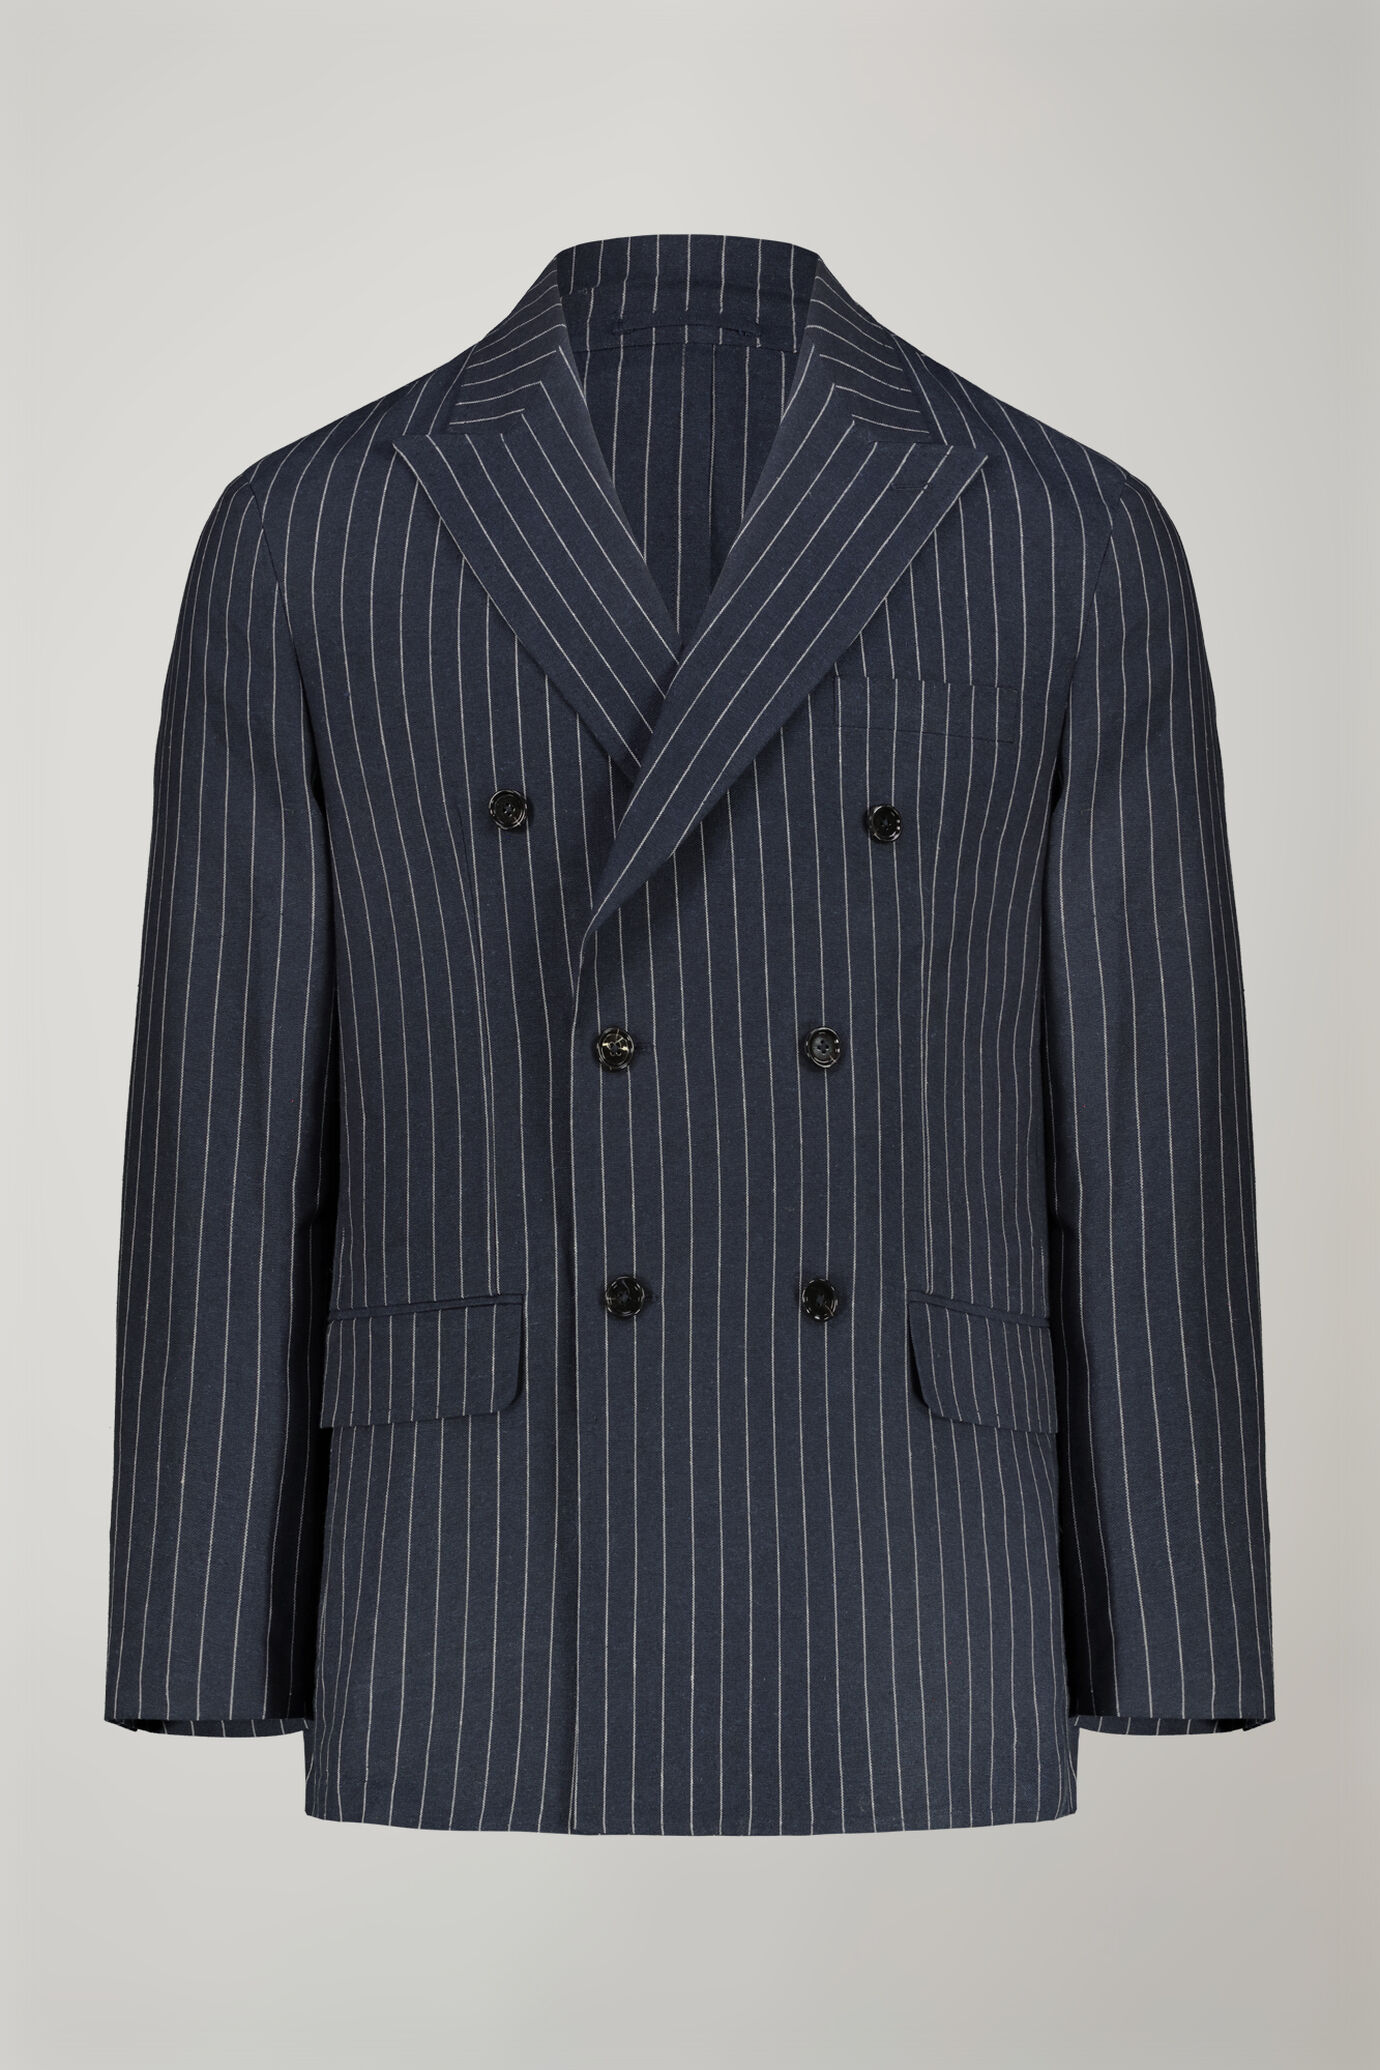 Men's unlined double-breasted blazer with spread collar and flap pockets linen and cotton fabric with regular fit pinstripe design image number 4